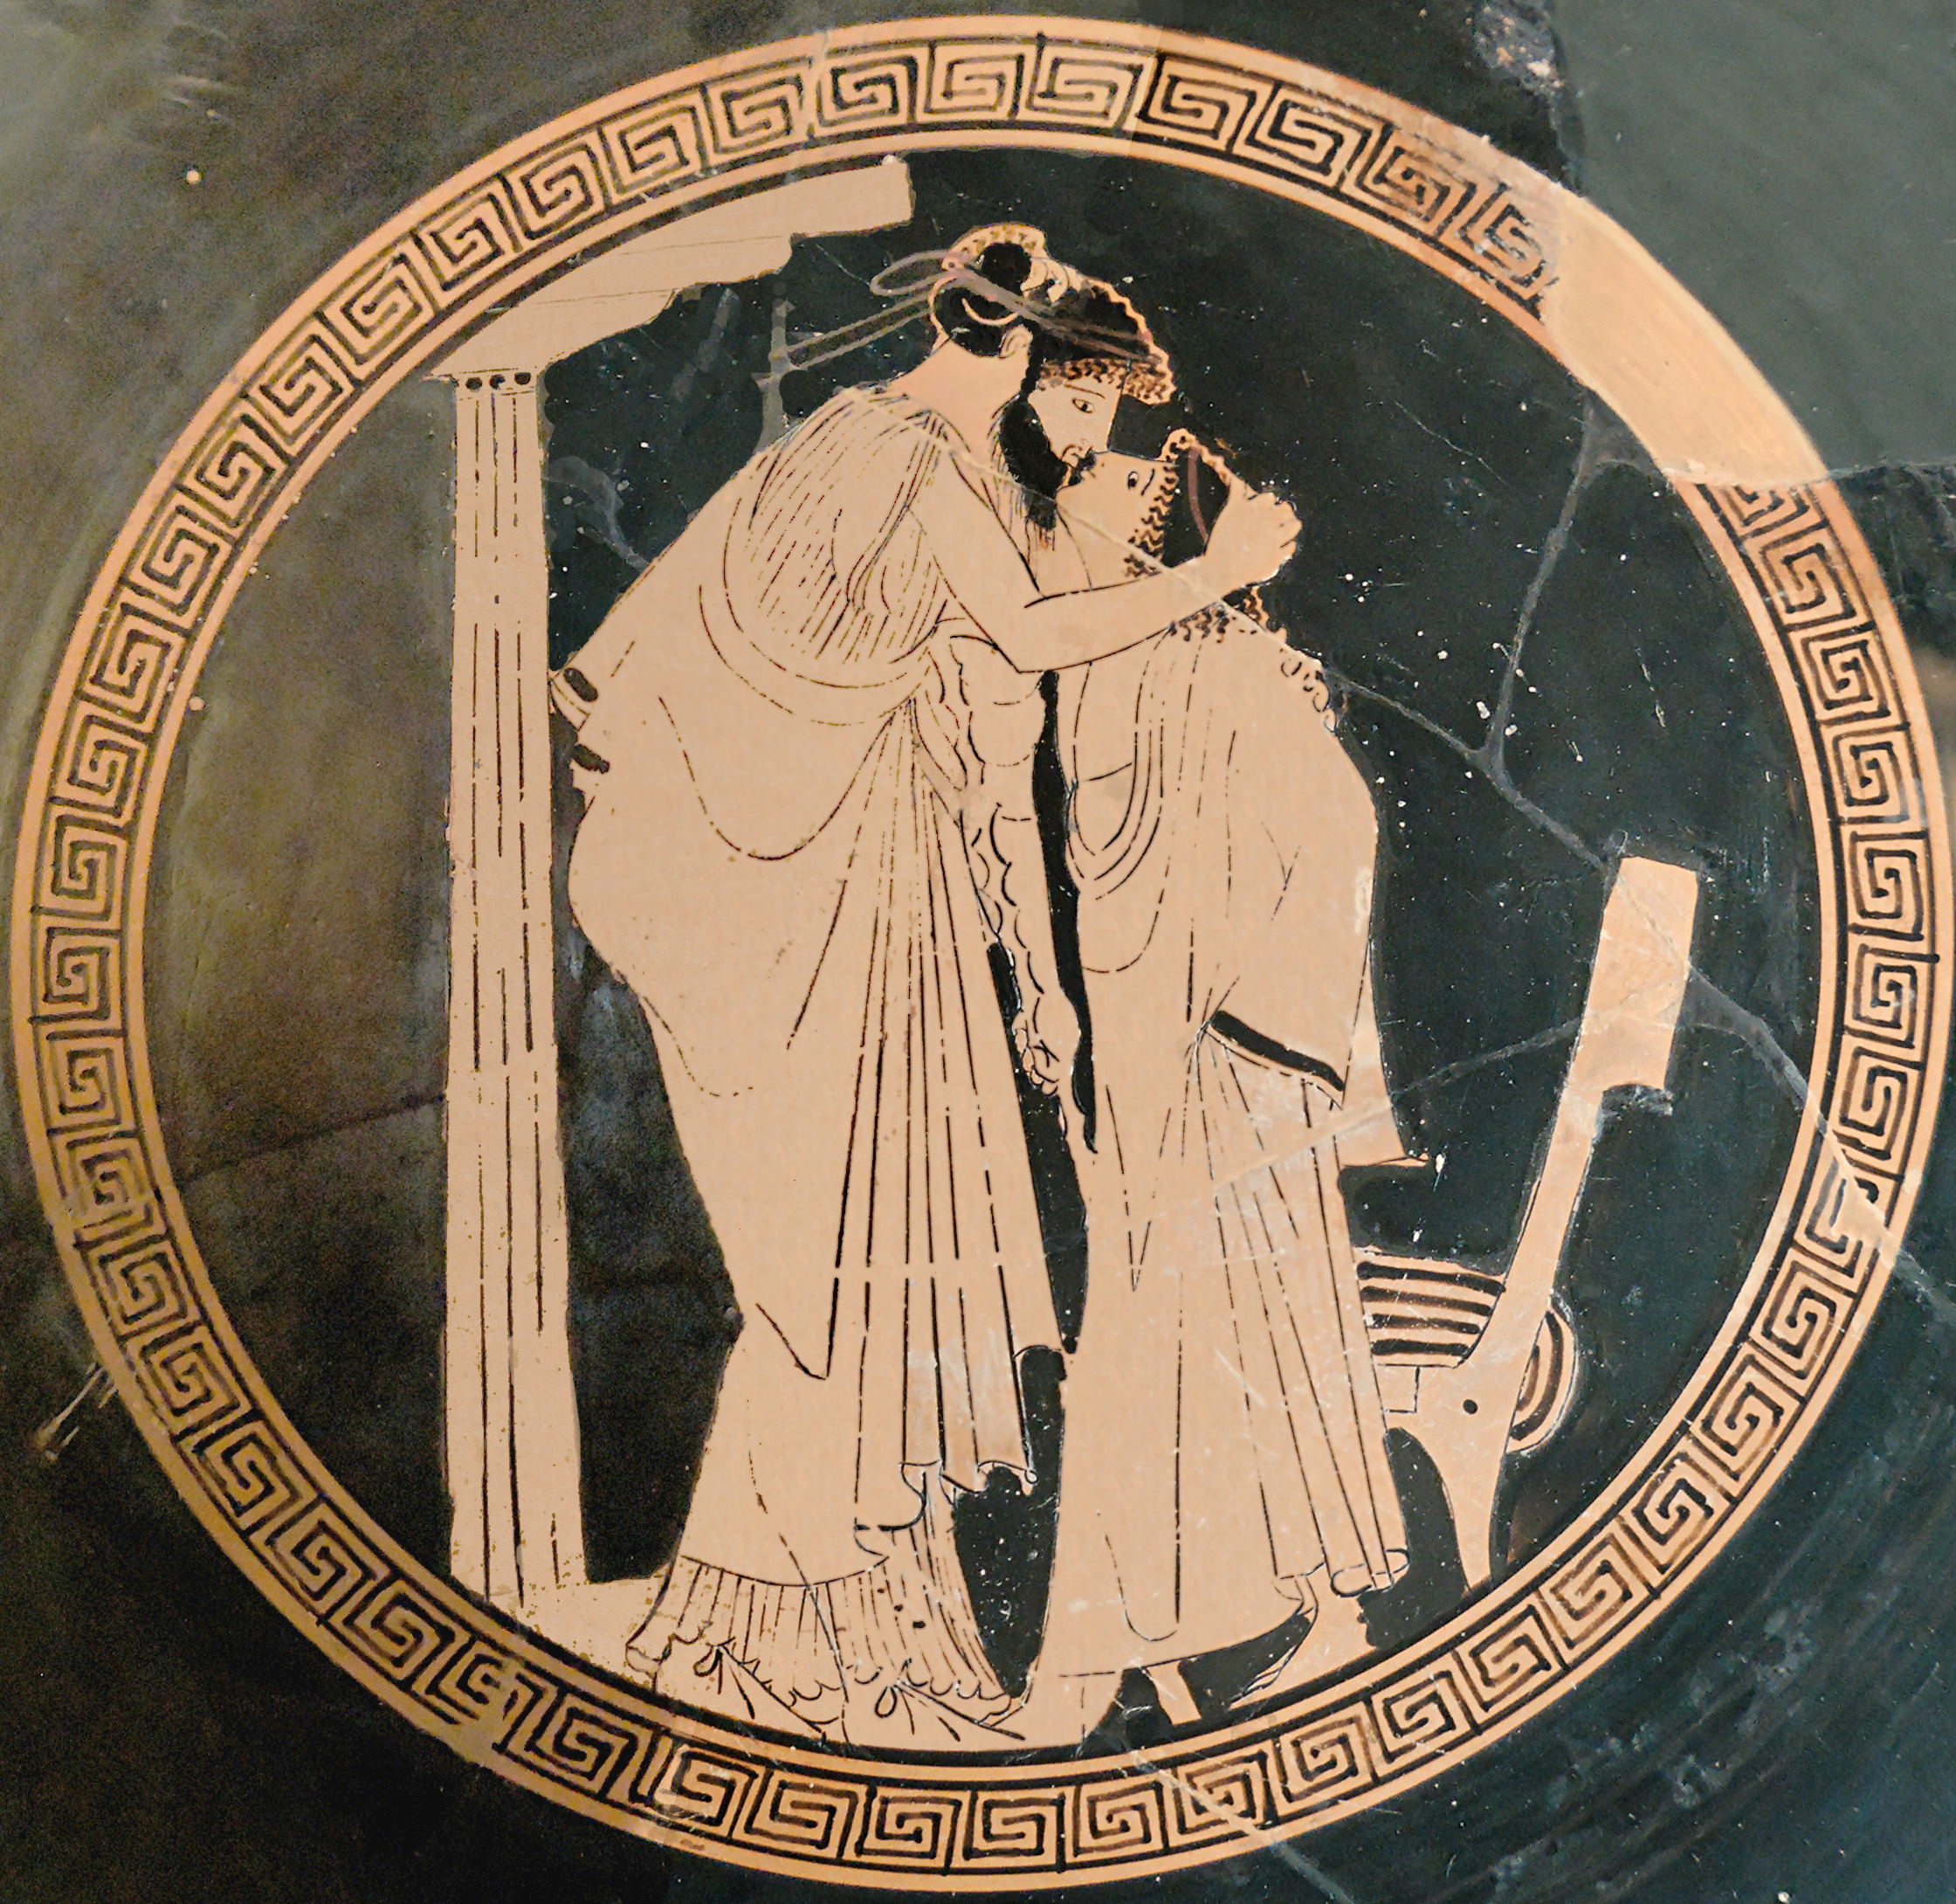 Alexander the great portraied as a bisexual